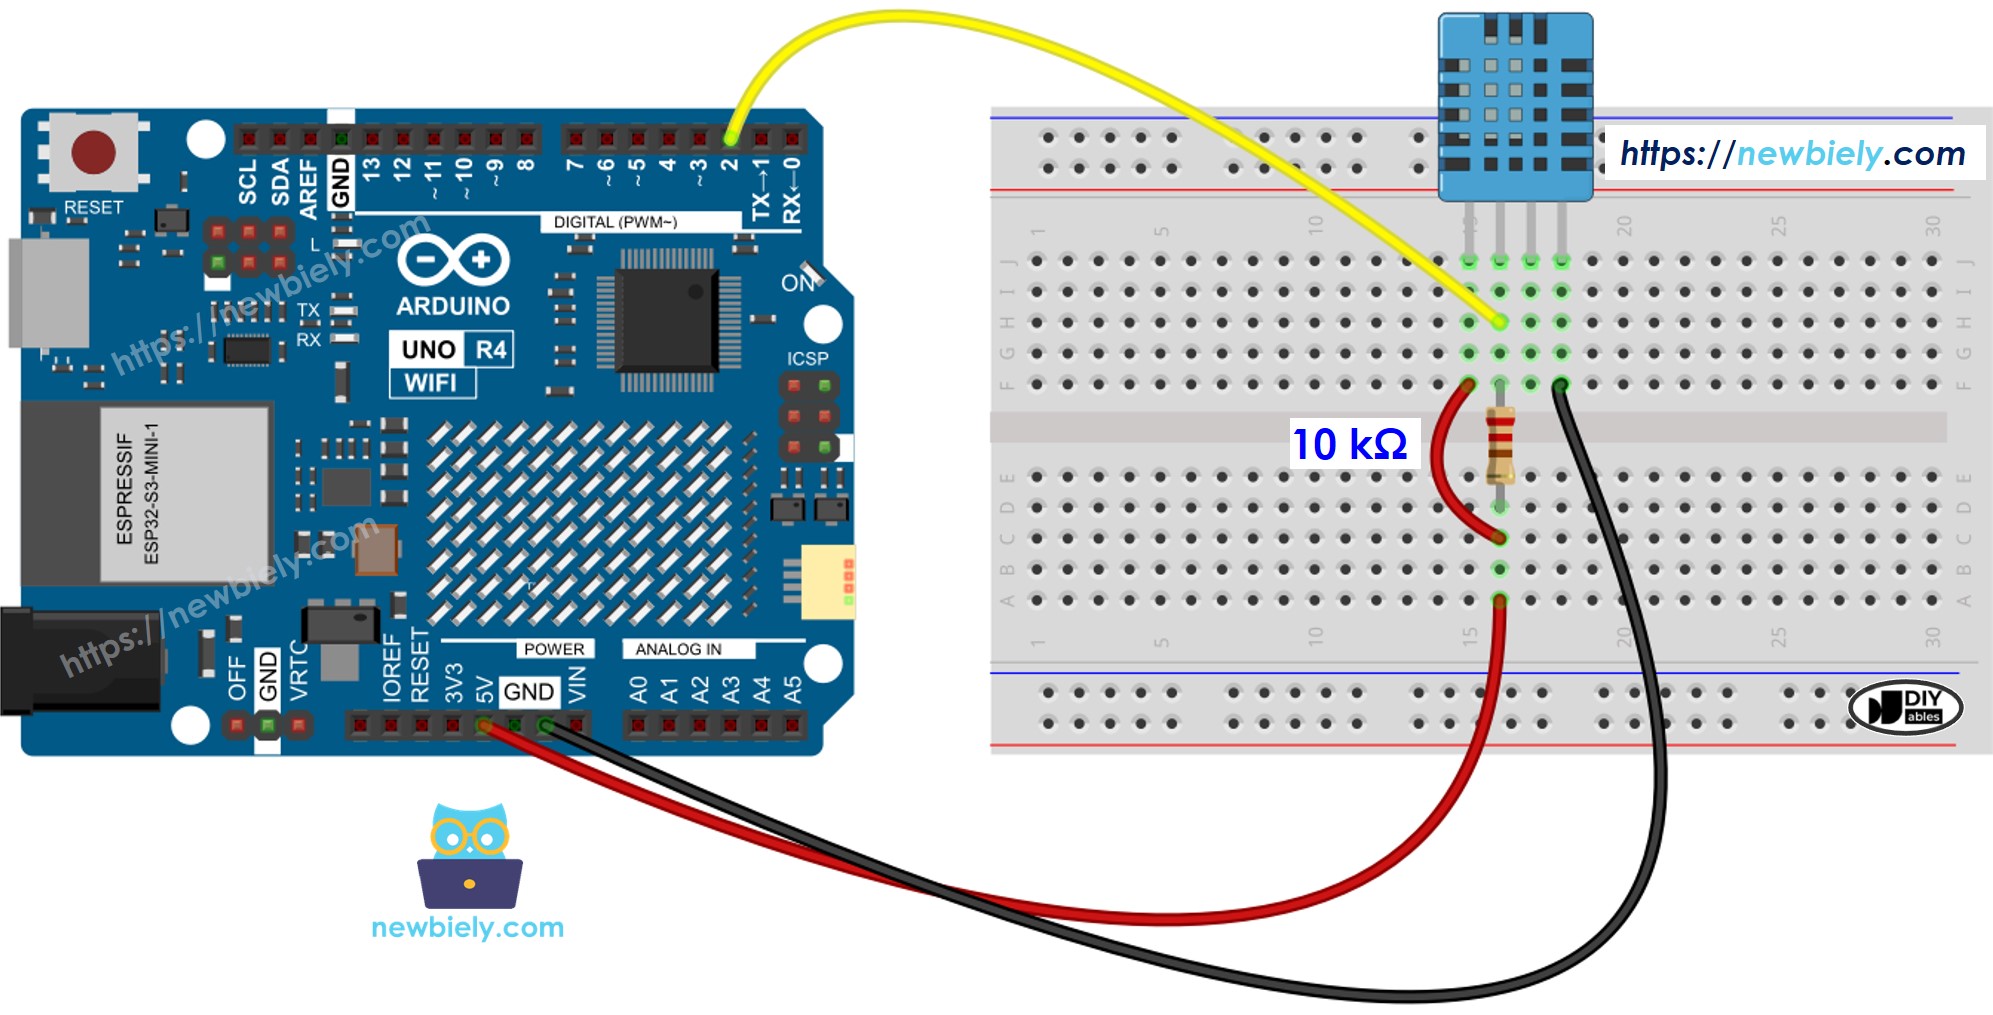 The wiring diagram between Arduino UNO R4 DHT11 Temperature and humidity Sensor